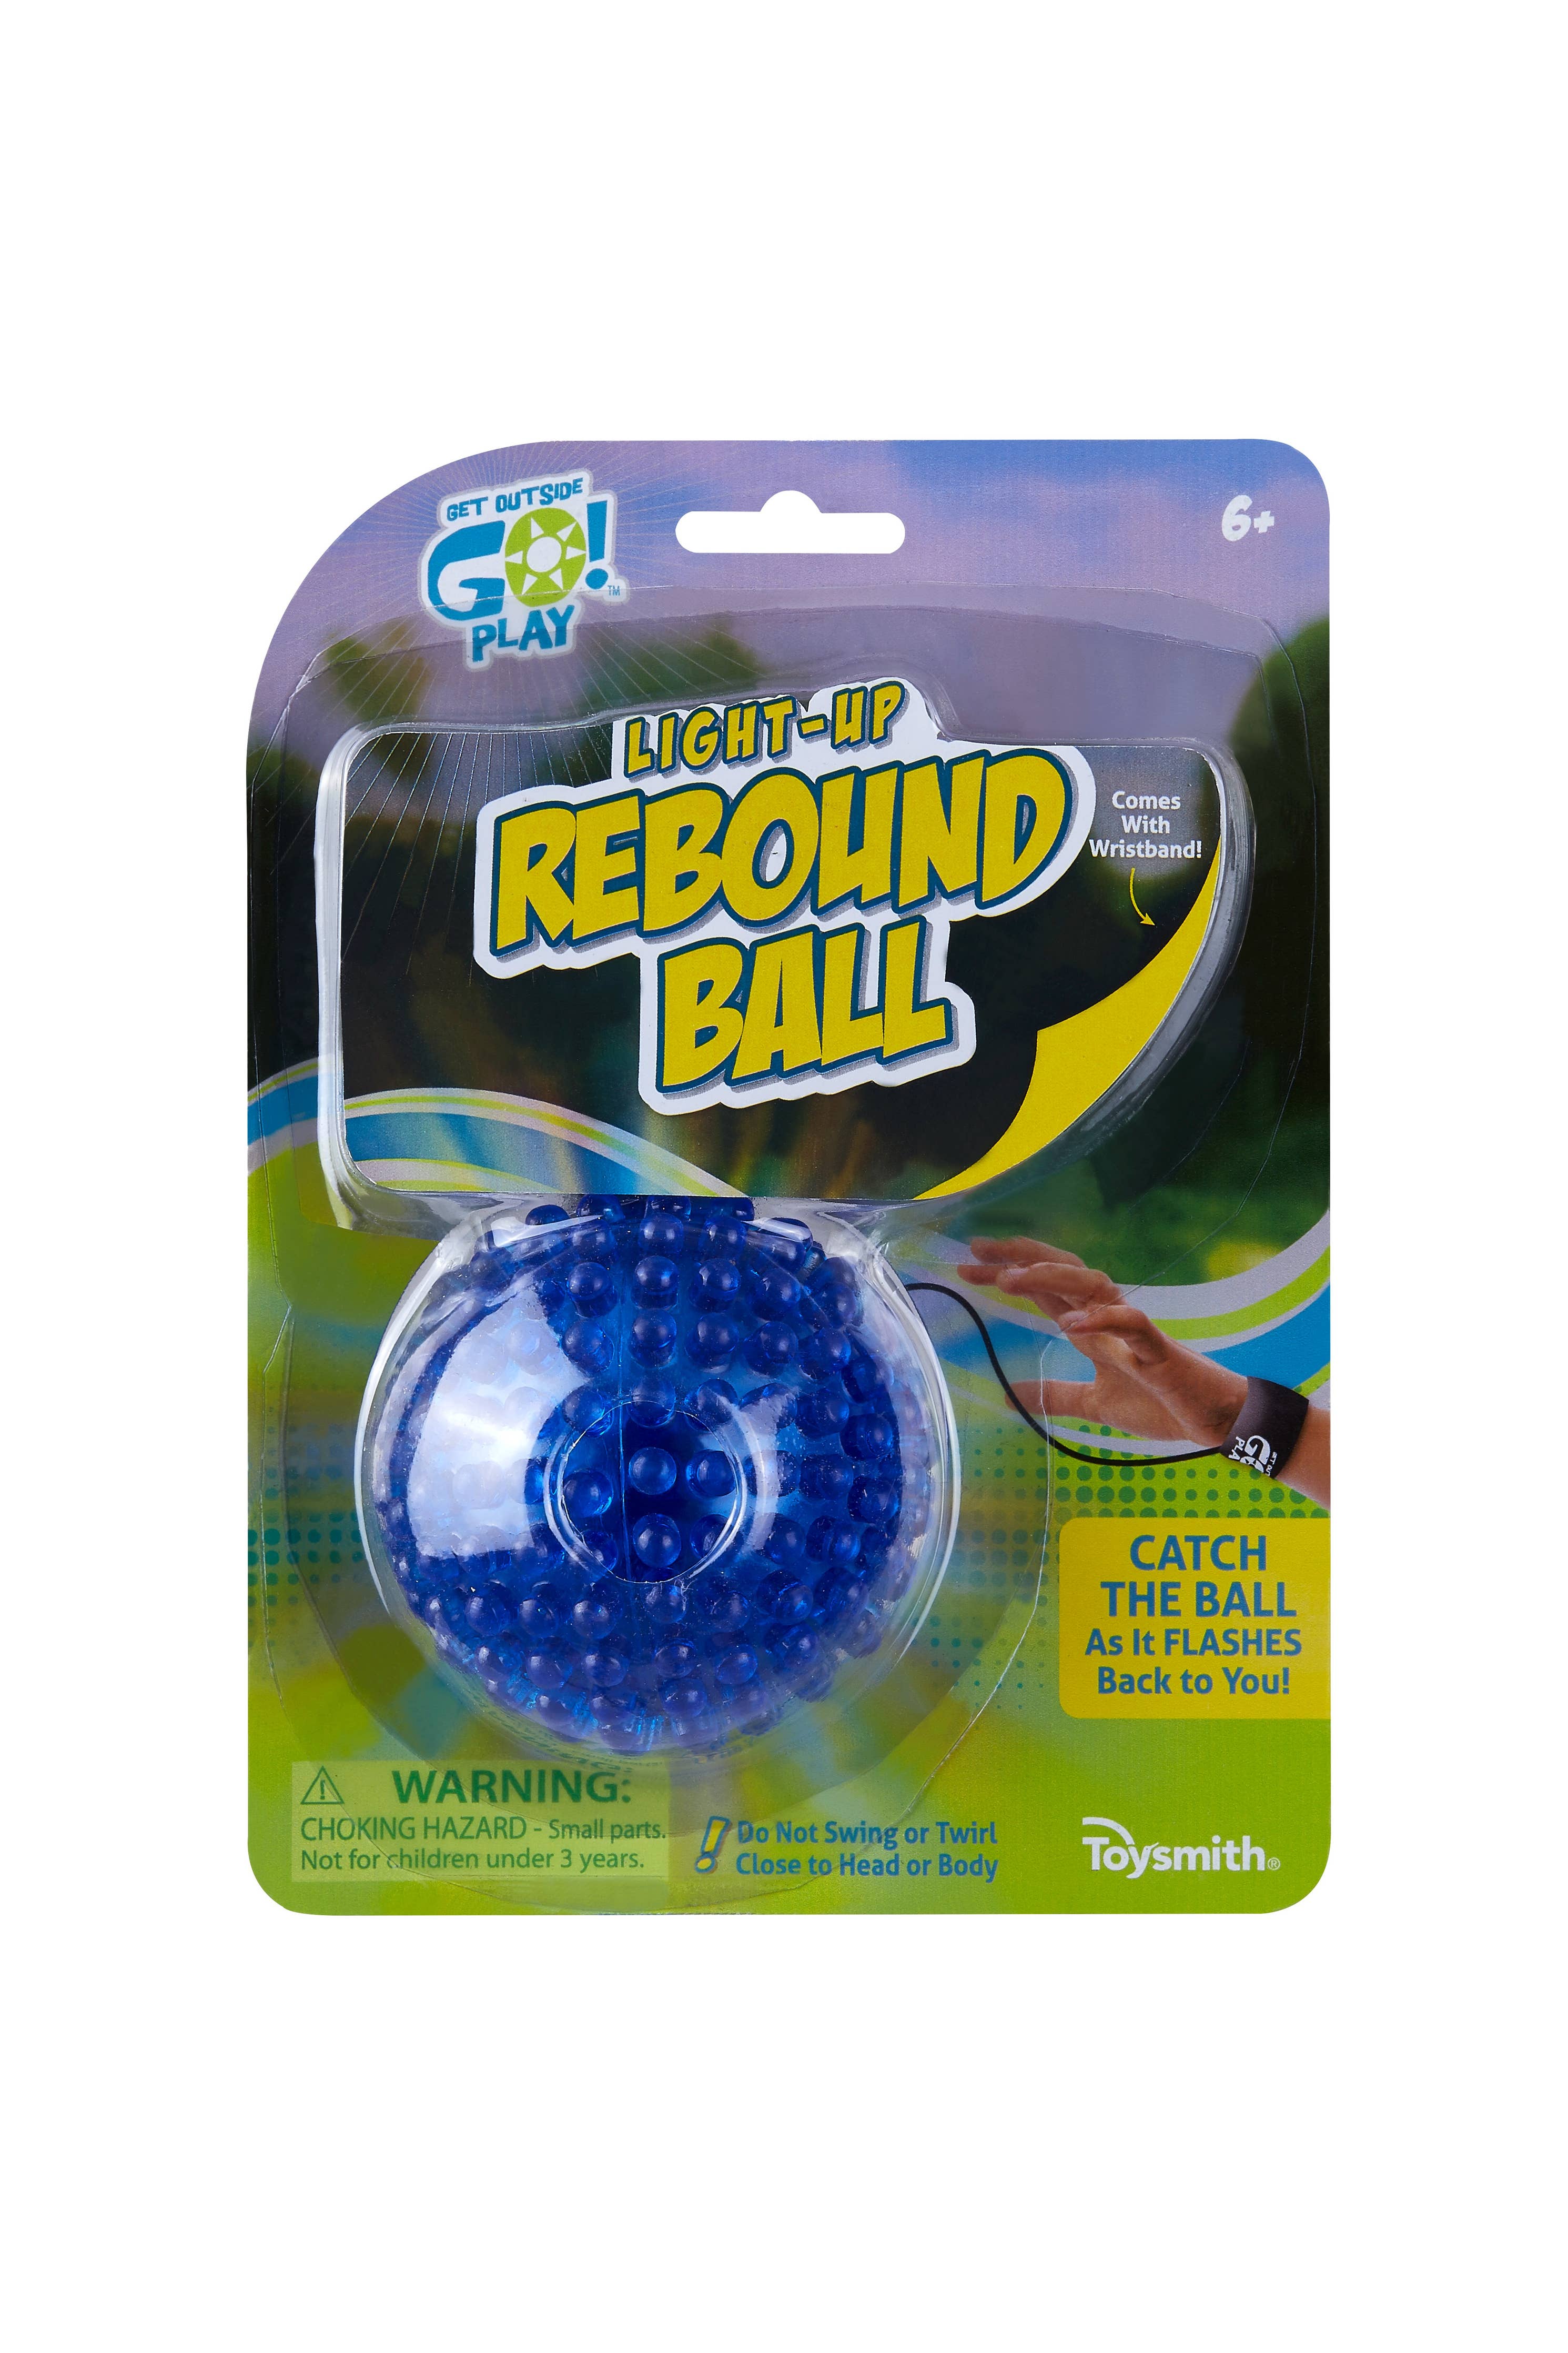 Toysmith - Get Outside GO!™ Play Light-Up Rebound Ball